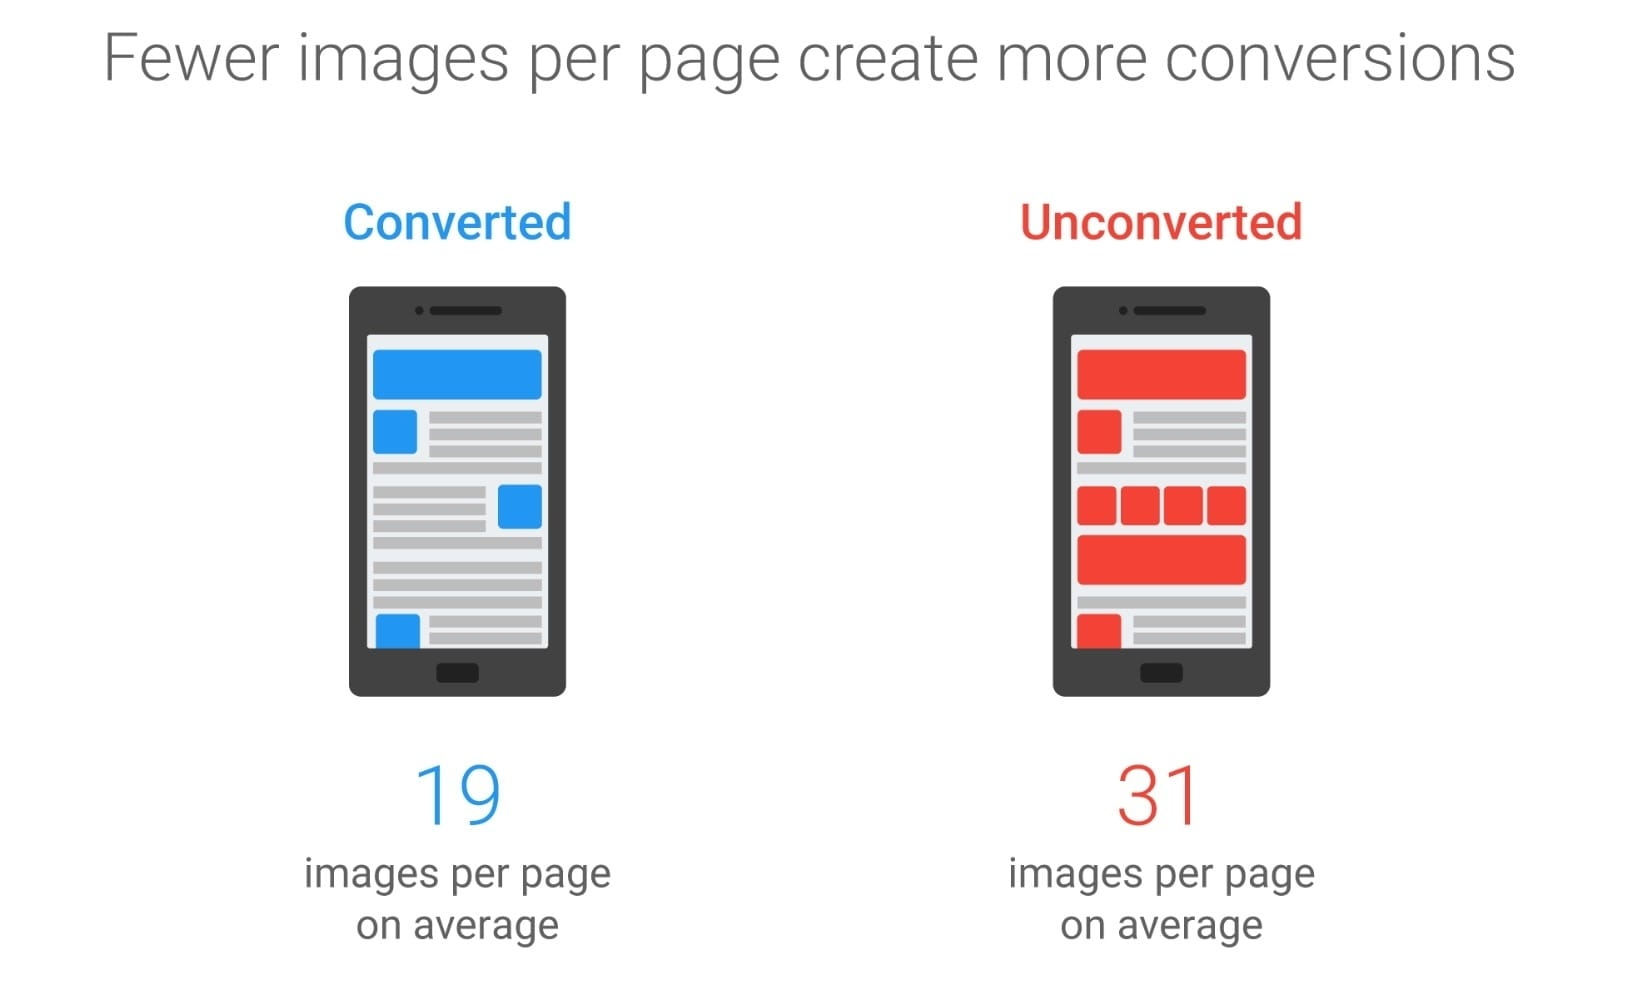 Per Soasta/Google research from 2016, images were the 2nd highest predictor of conversions with the best pages having 38% fewer images.